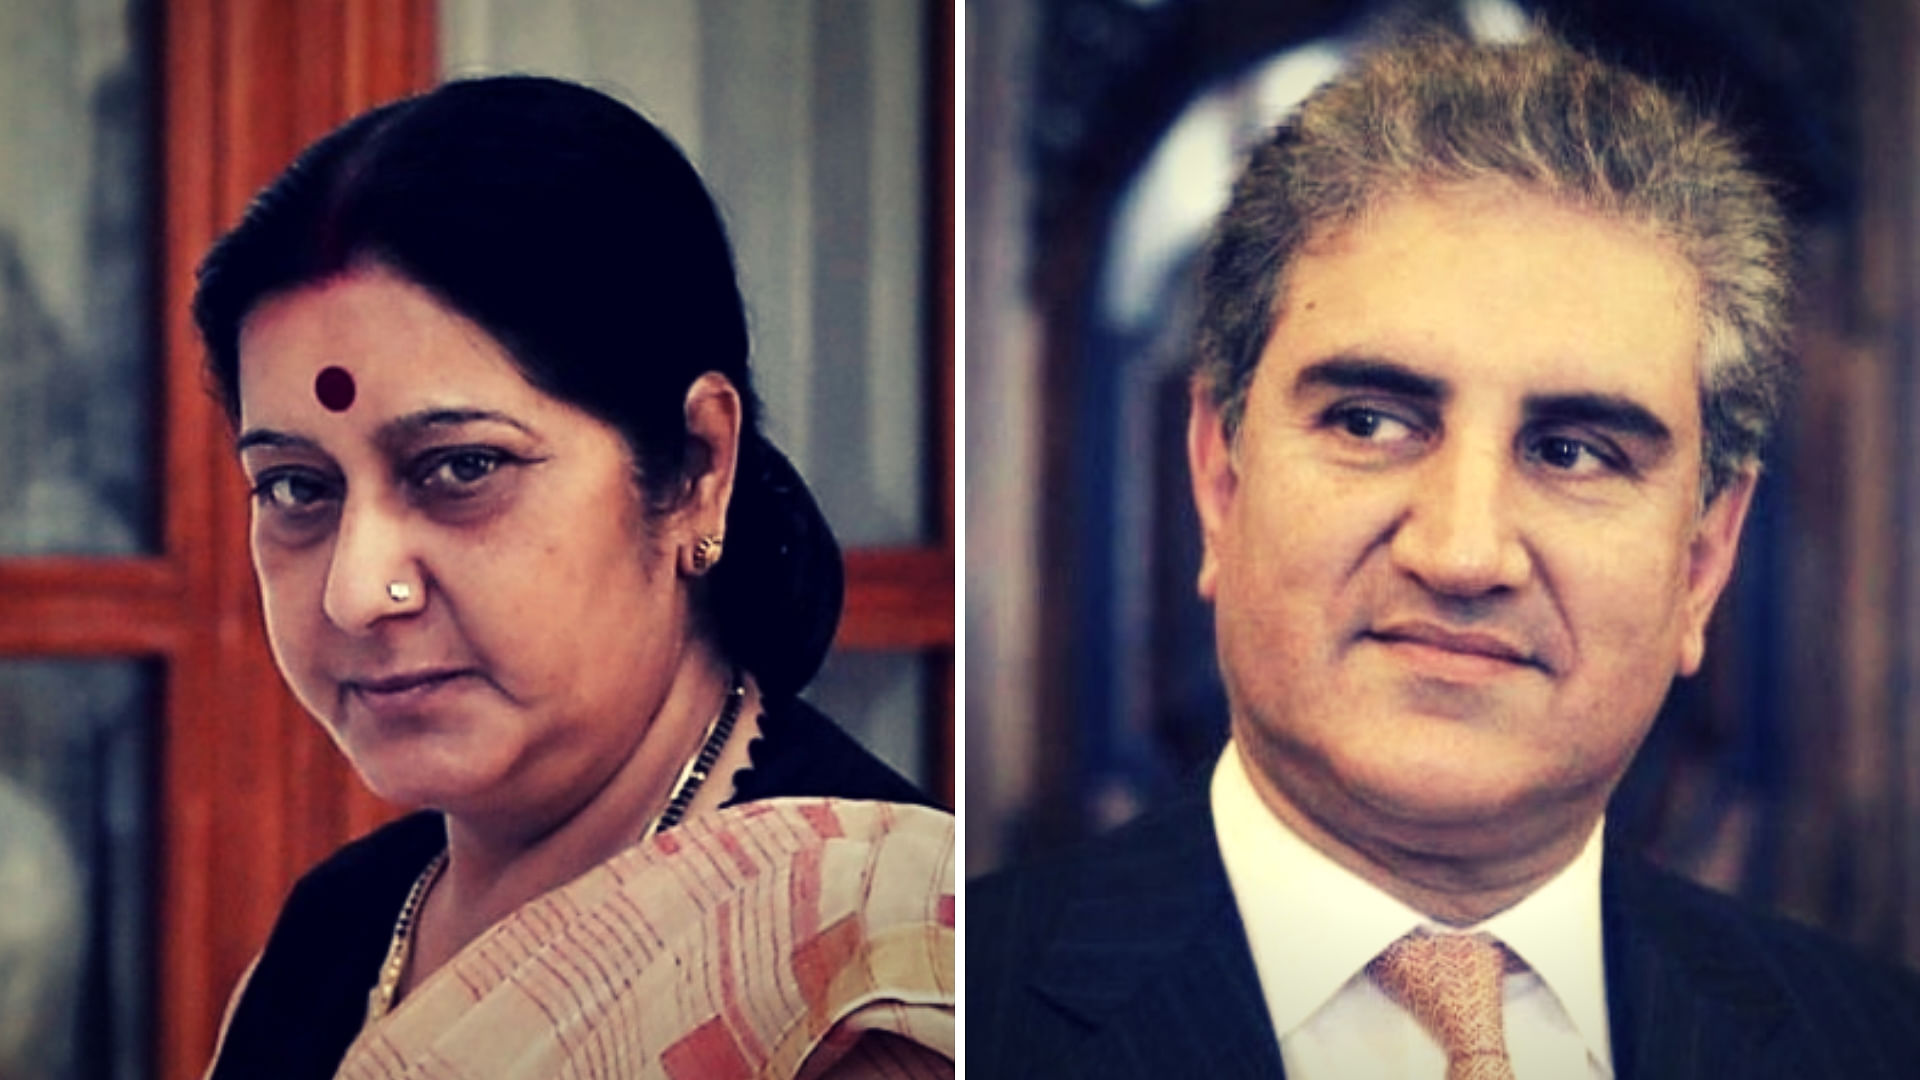 A meeting between External Affairs Minister Sushma Swaraj and Pakistan’s Minister of Foreign Affairs Makhdoom Shah Mahmood Qureshi was scheduled for later this month in New York.